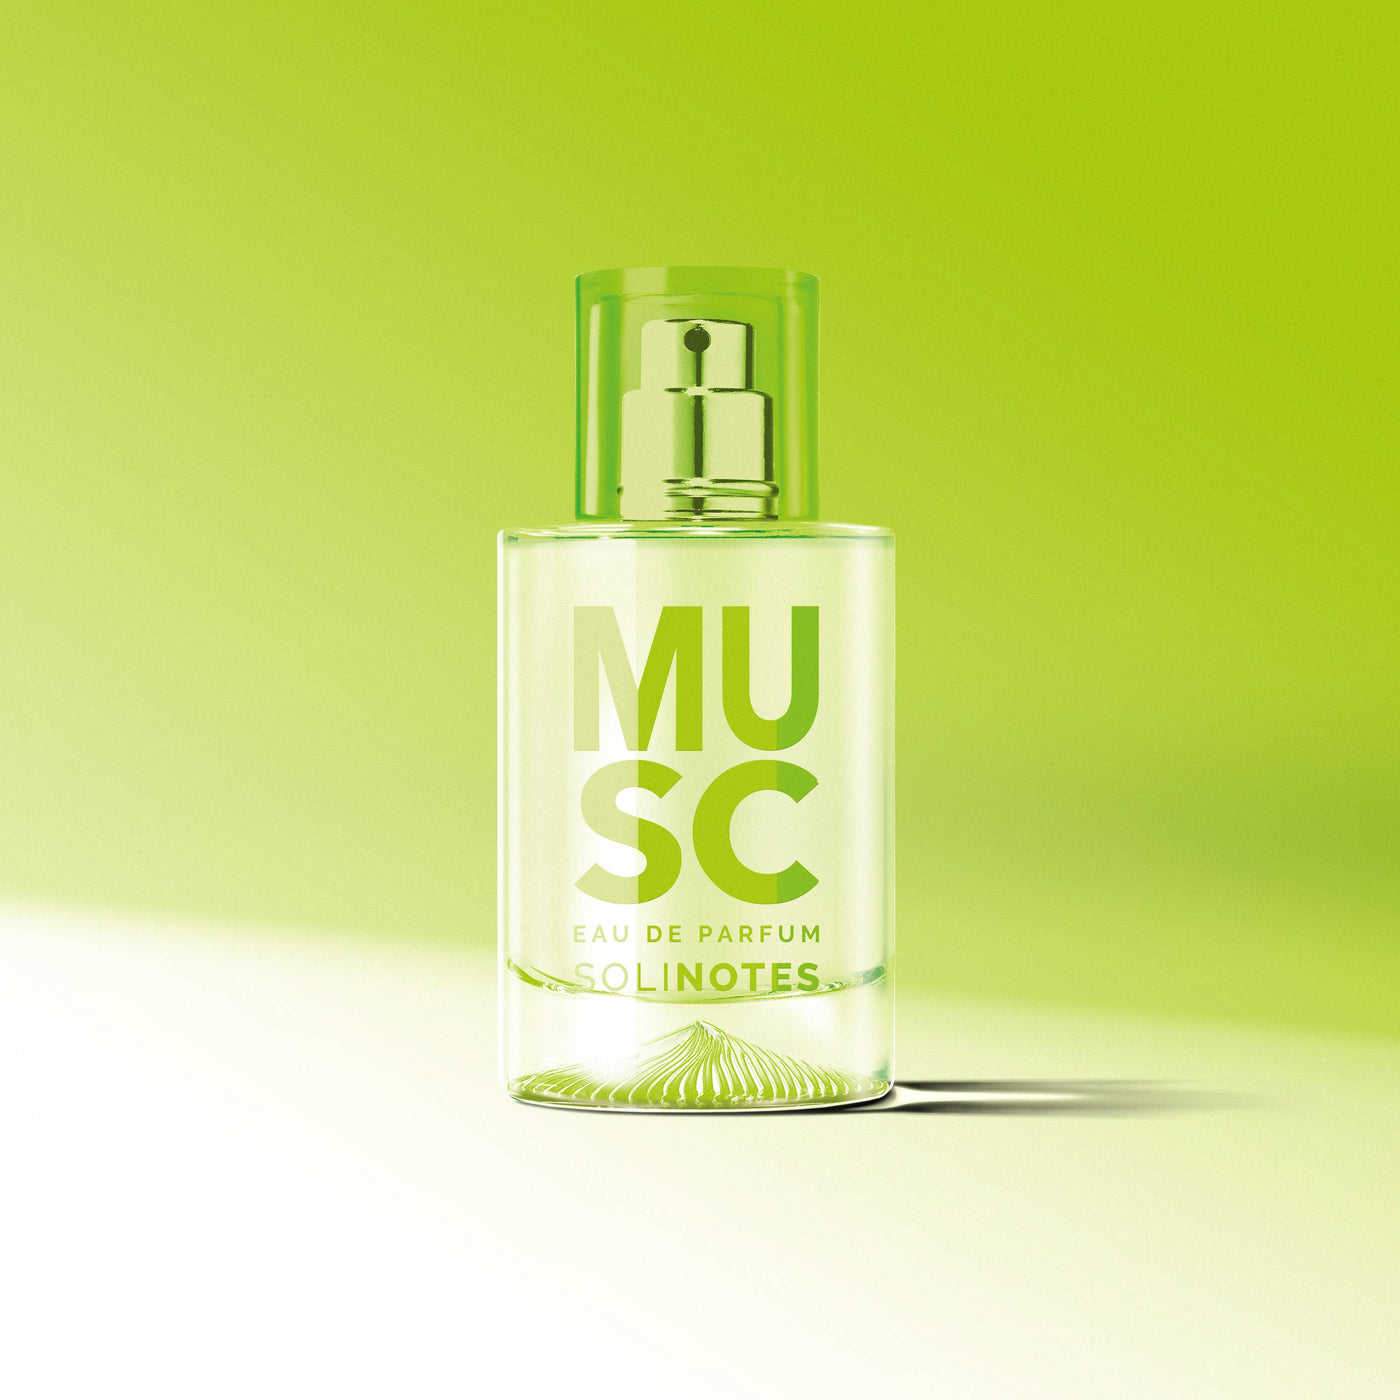 Solinotes (US Stores) - Distributed by Scents of Europe Musk Eau de Parfum 1.7 oz - CLEAN BEAUTY - Simple Good